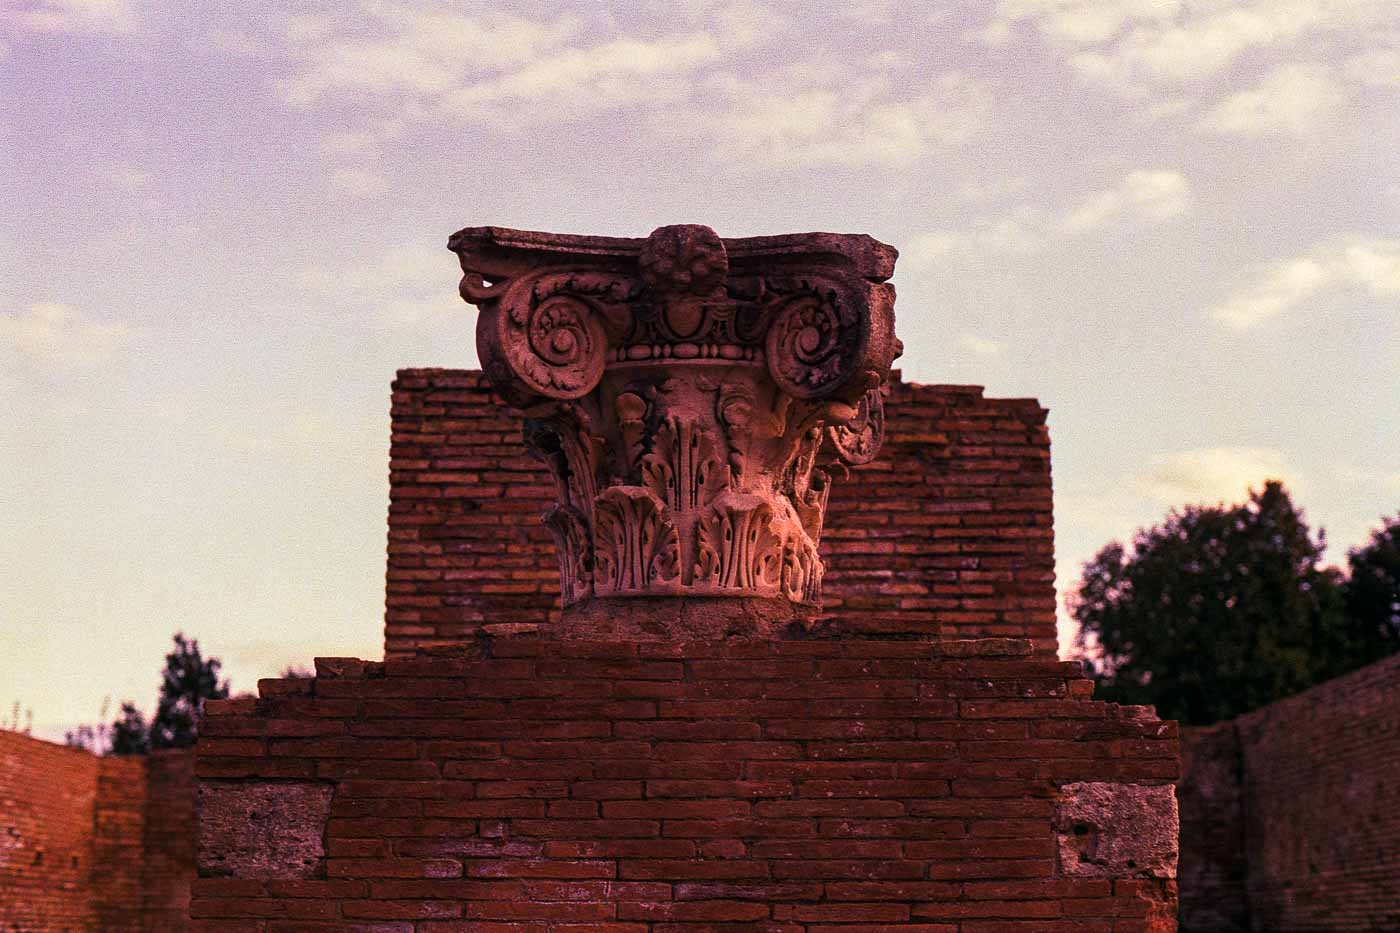 Are you a history buff who’s always been fascinated by the ancient Roman Empire? If you’re tired of the crowds at the Colosseum, why not take a trip to Ostia Antica?